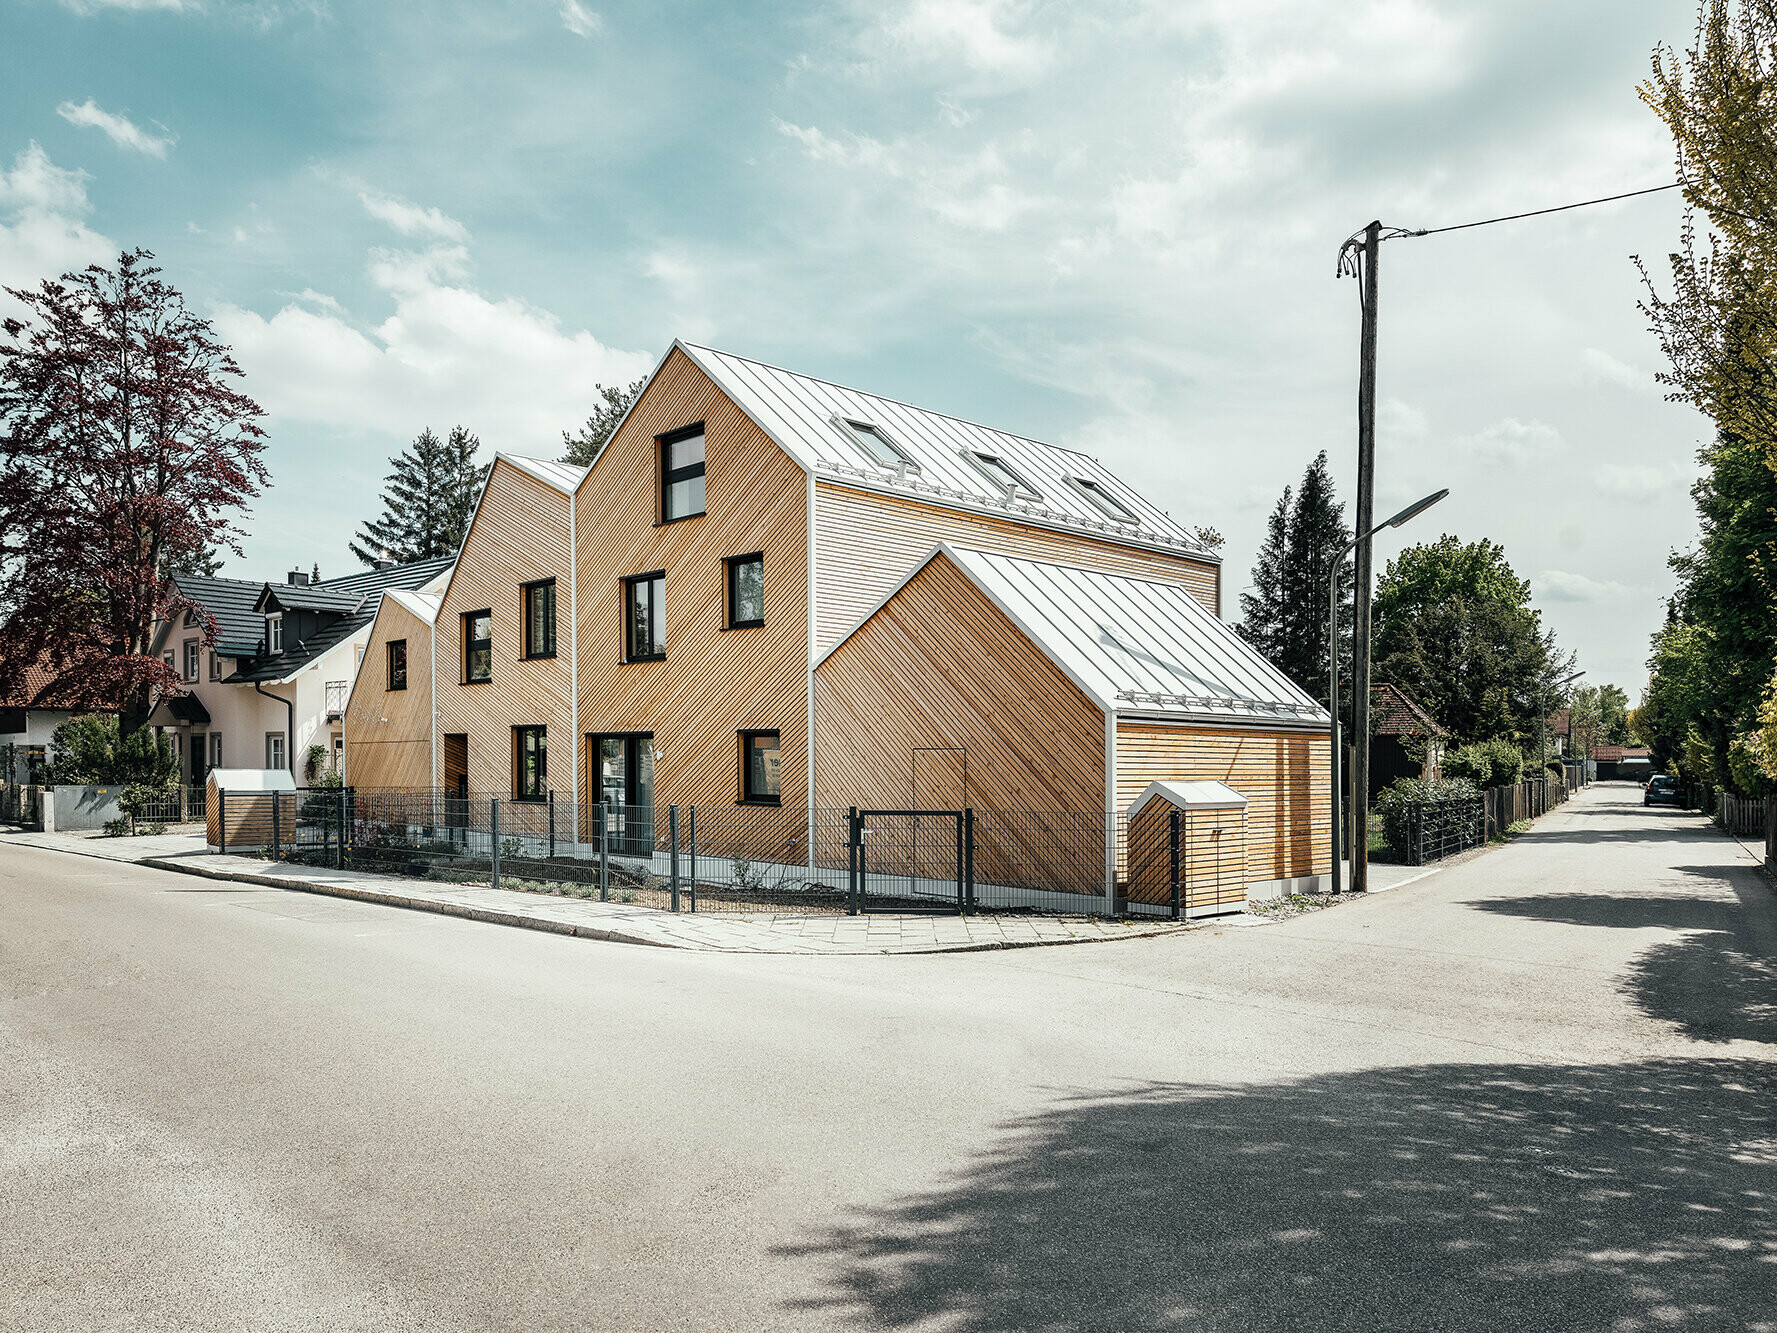 Lateral street view of the semi-detached house "Hausfuchs" ("house fox"), white PREFA roofs with Prefalz sheets, IFUB*